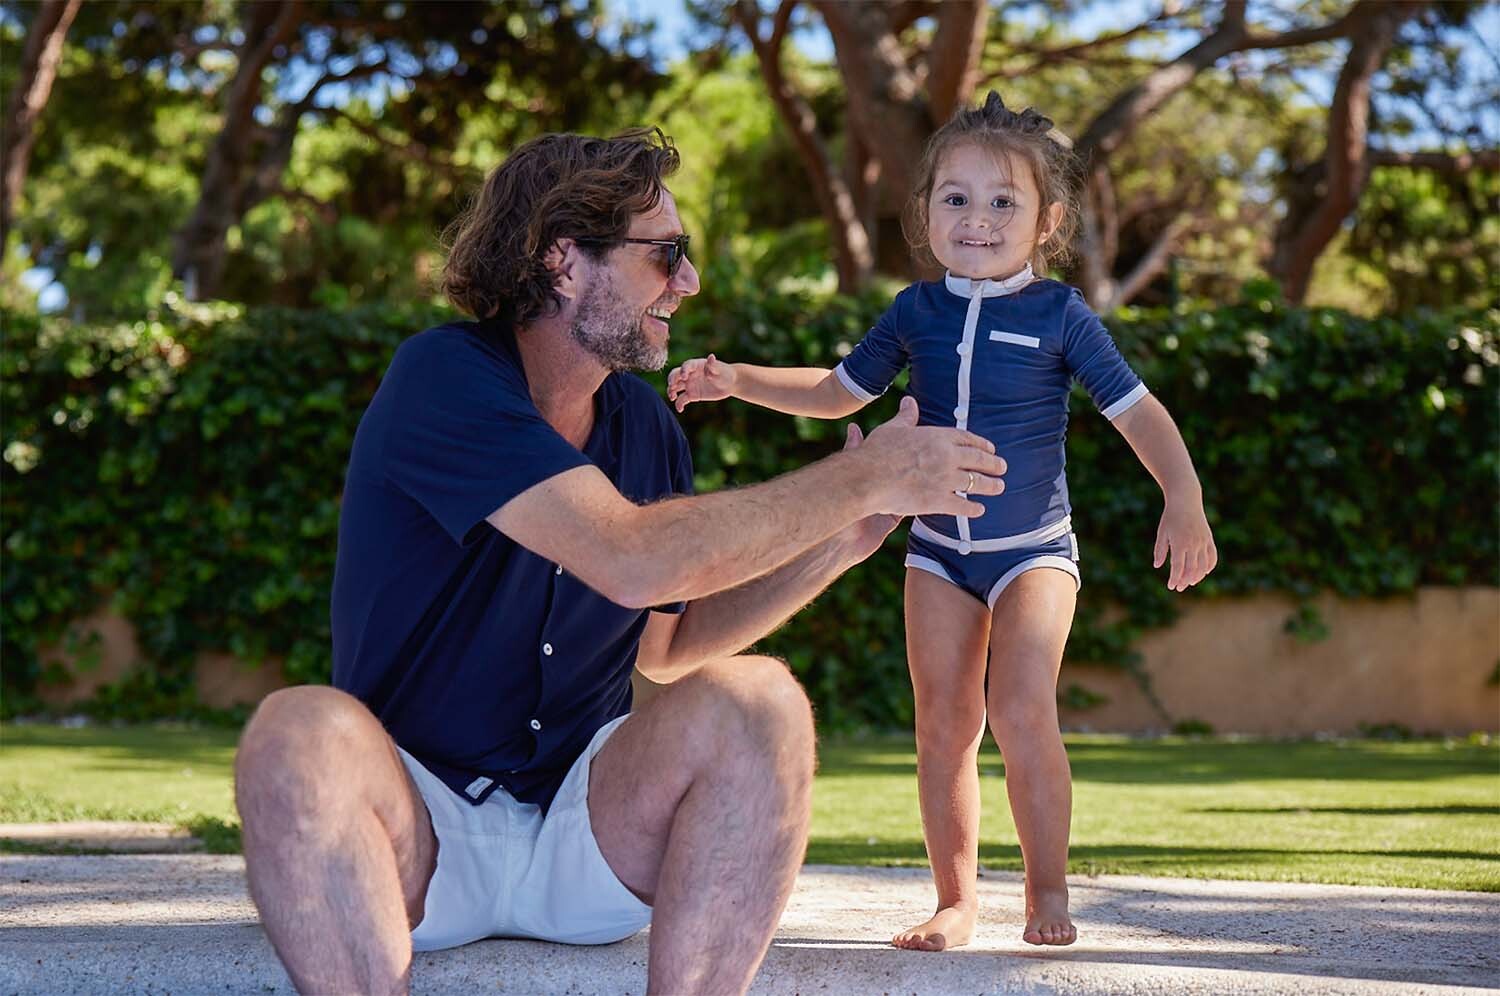 Love is the greatest gift - Matching Swimwear for Father & Daughter